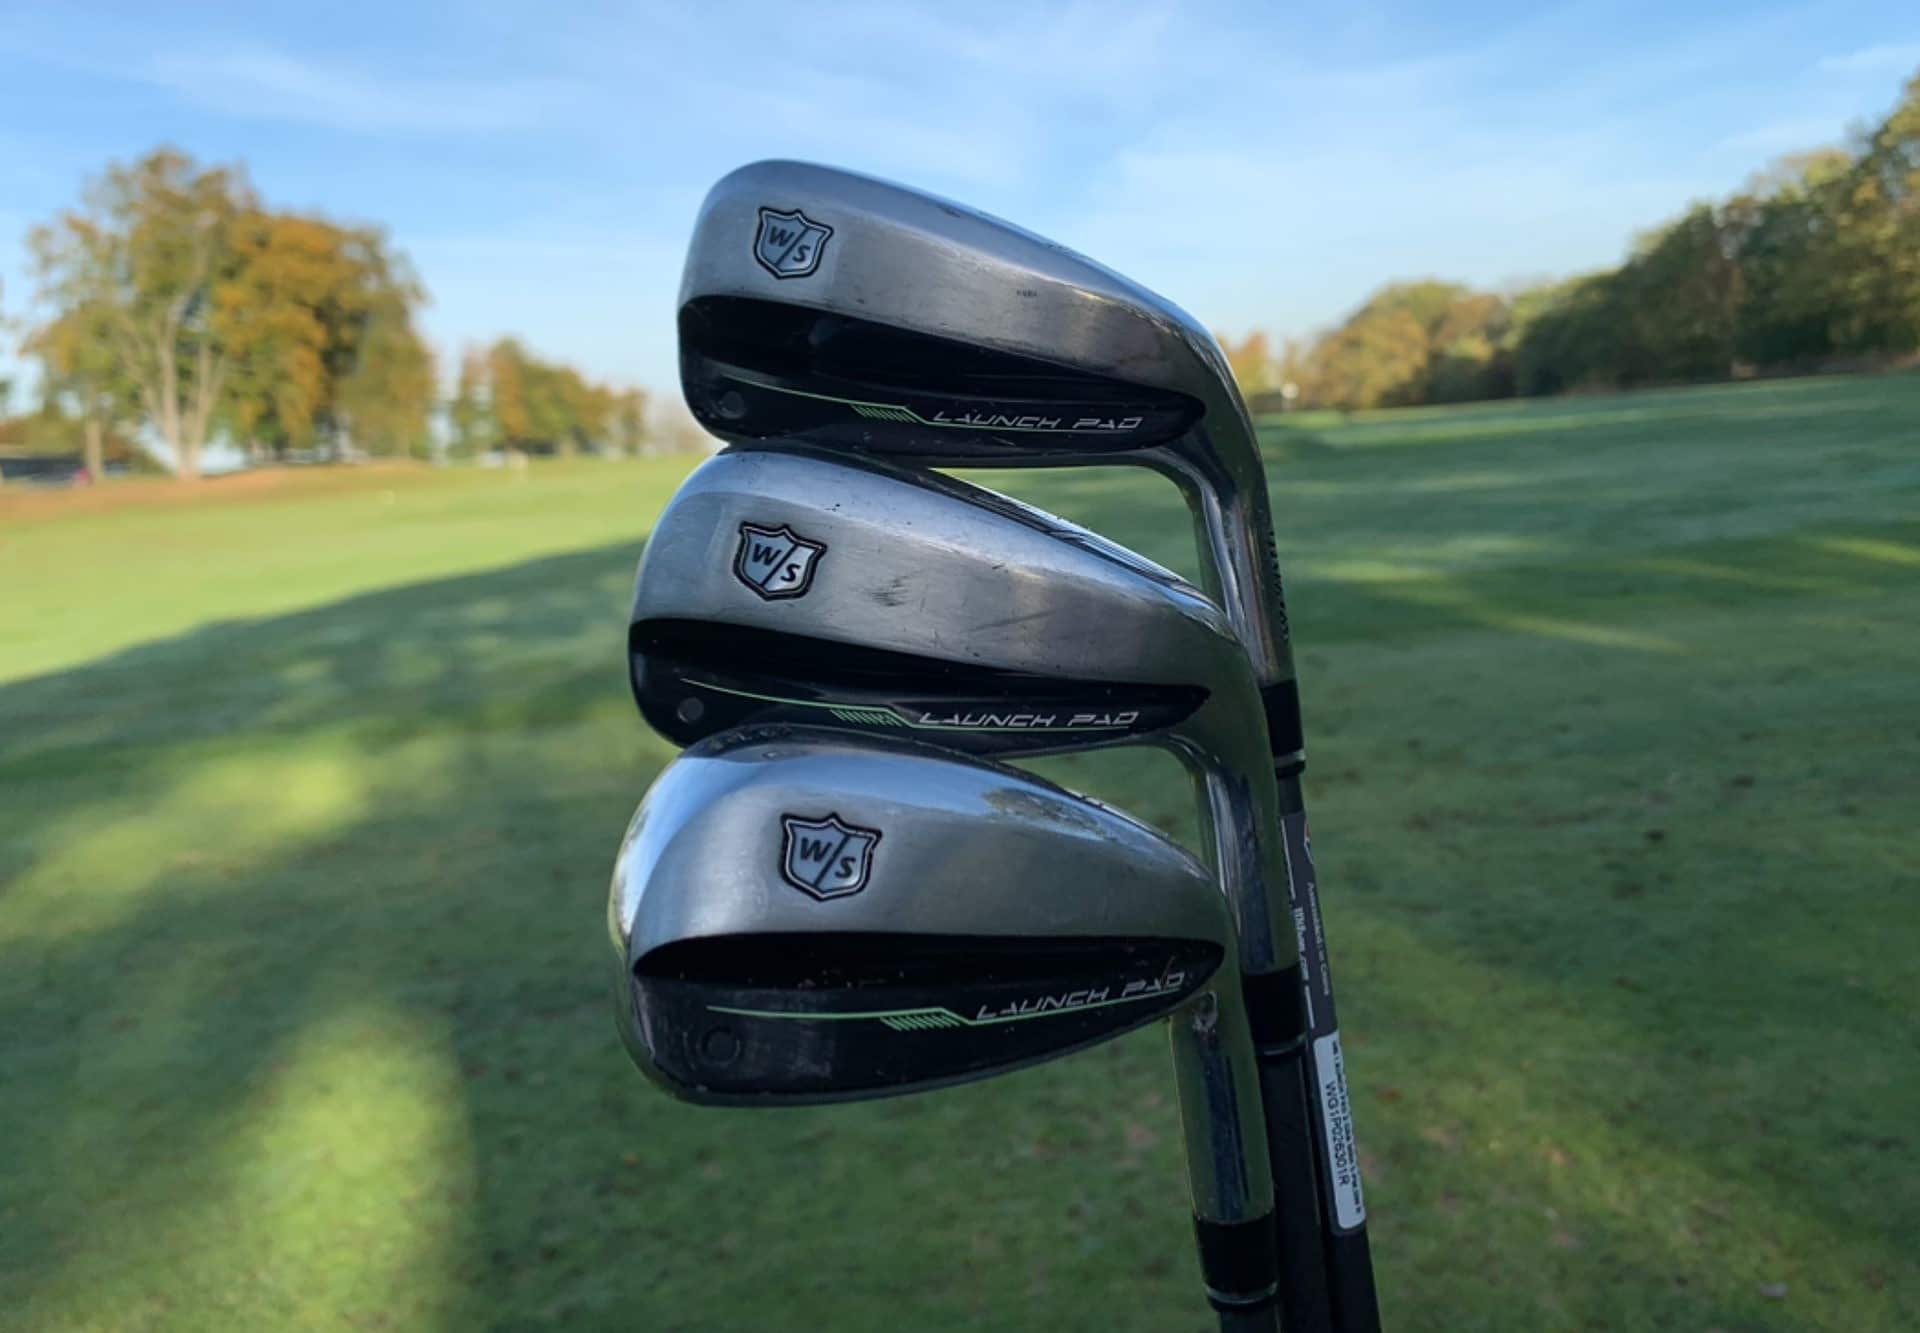 Wilson Launch Pad 2 irons review